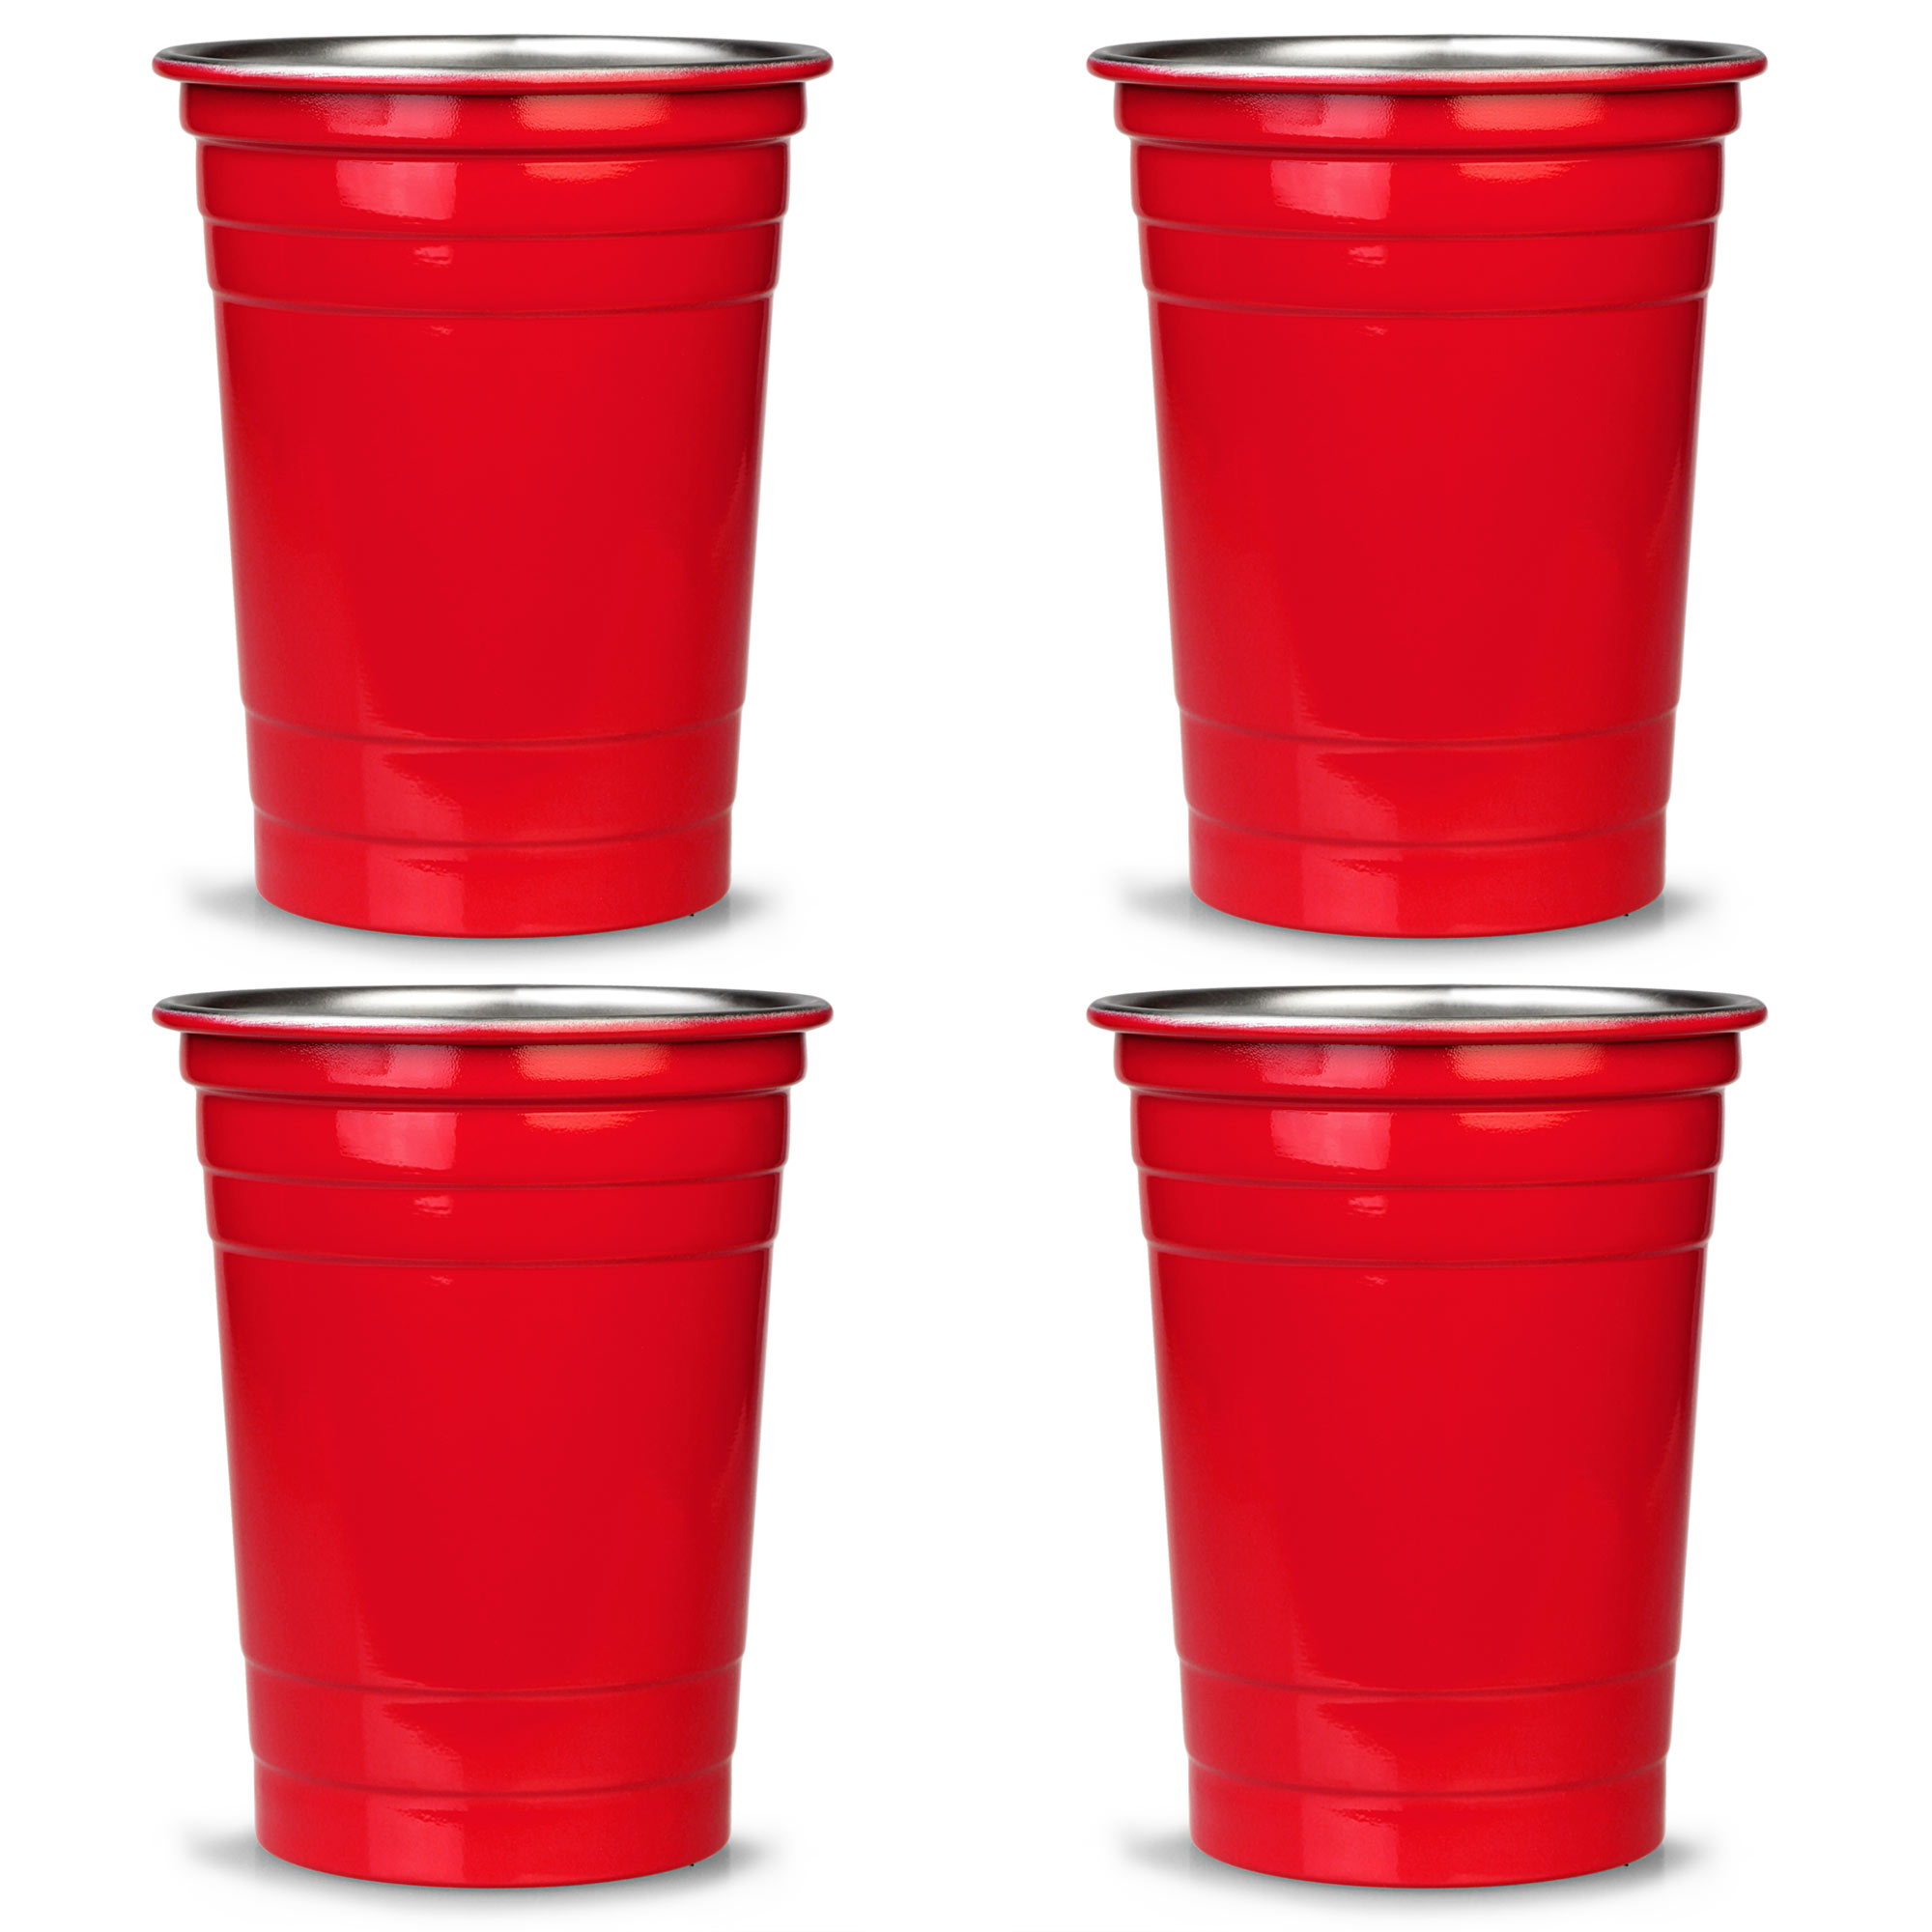 The Metal Party Cup Stainless Steel Classic Red Drinking Cup 500ml